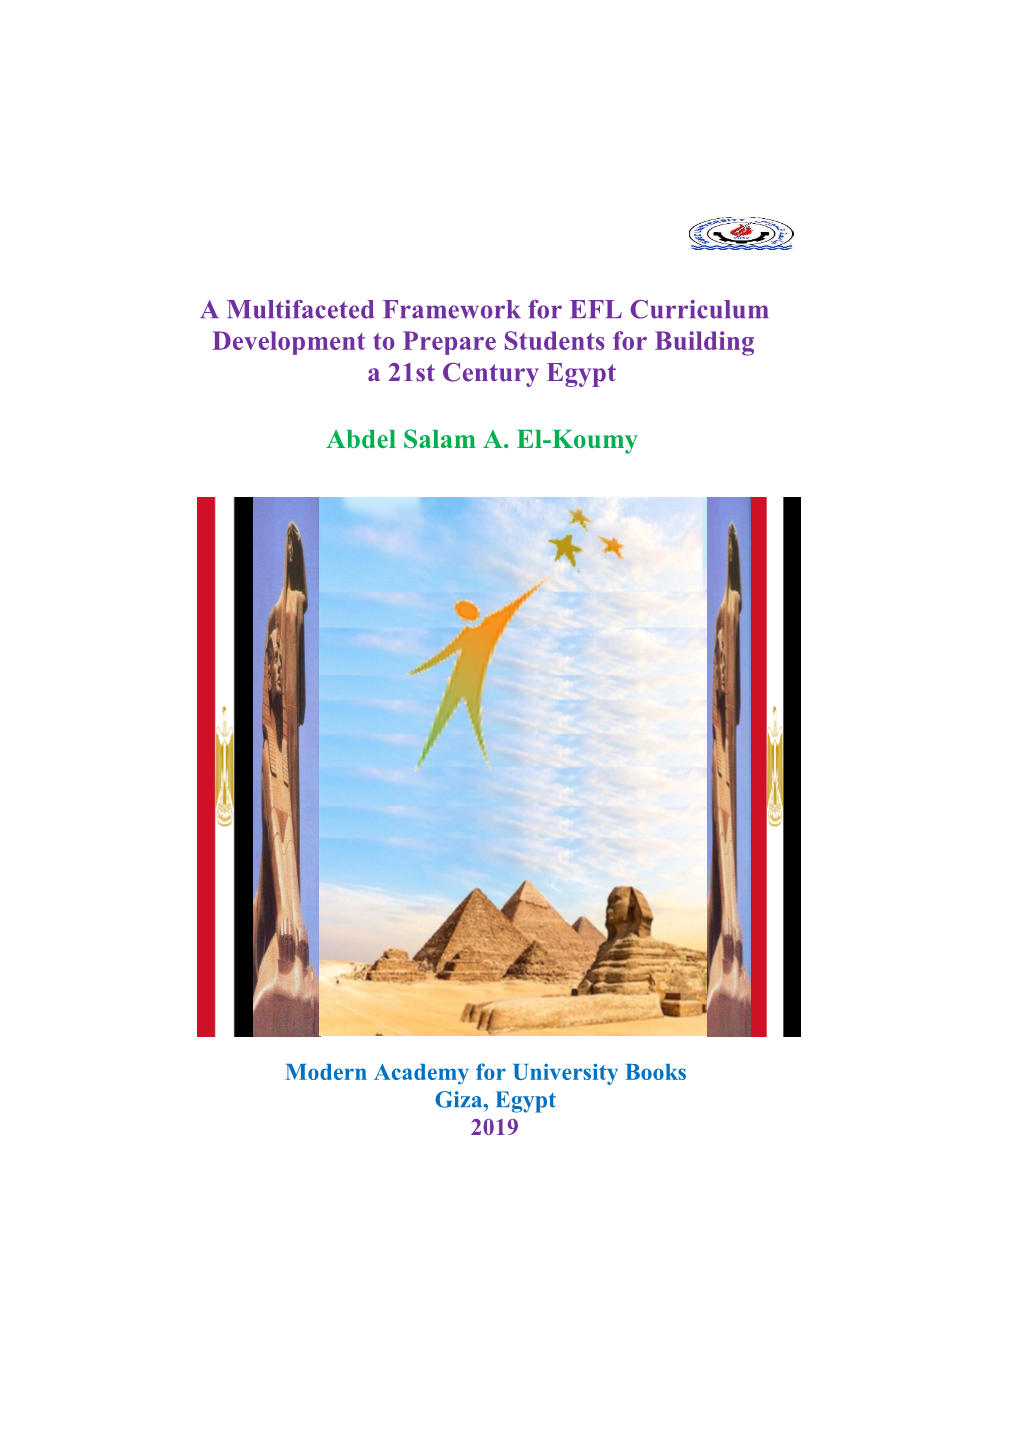 A Multifaceted Framework for EFL Curriculum Development to Prepare Students for Building a 21St Century Egypt